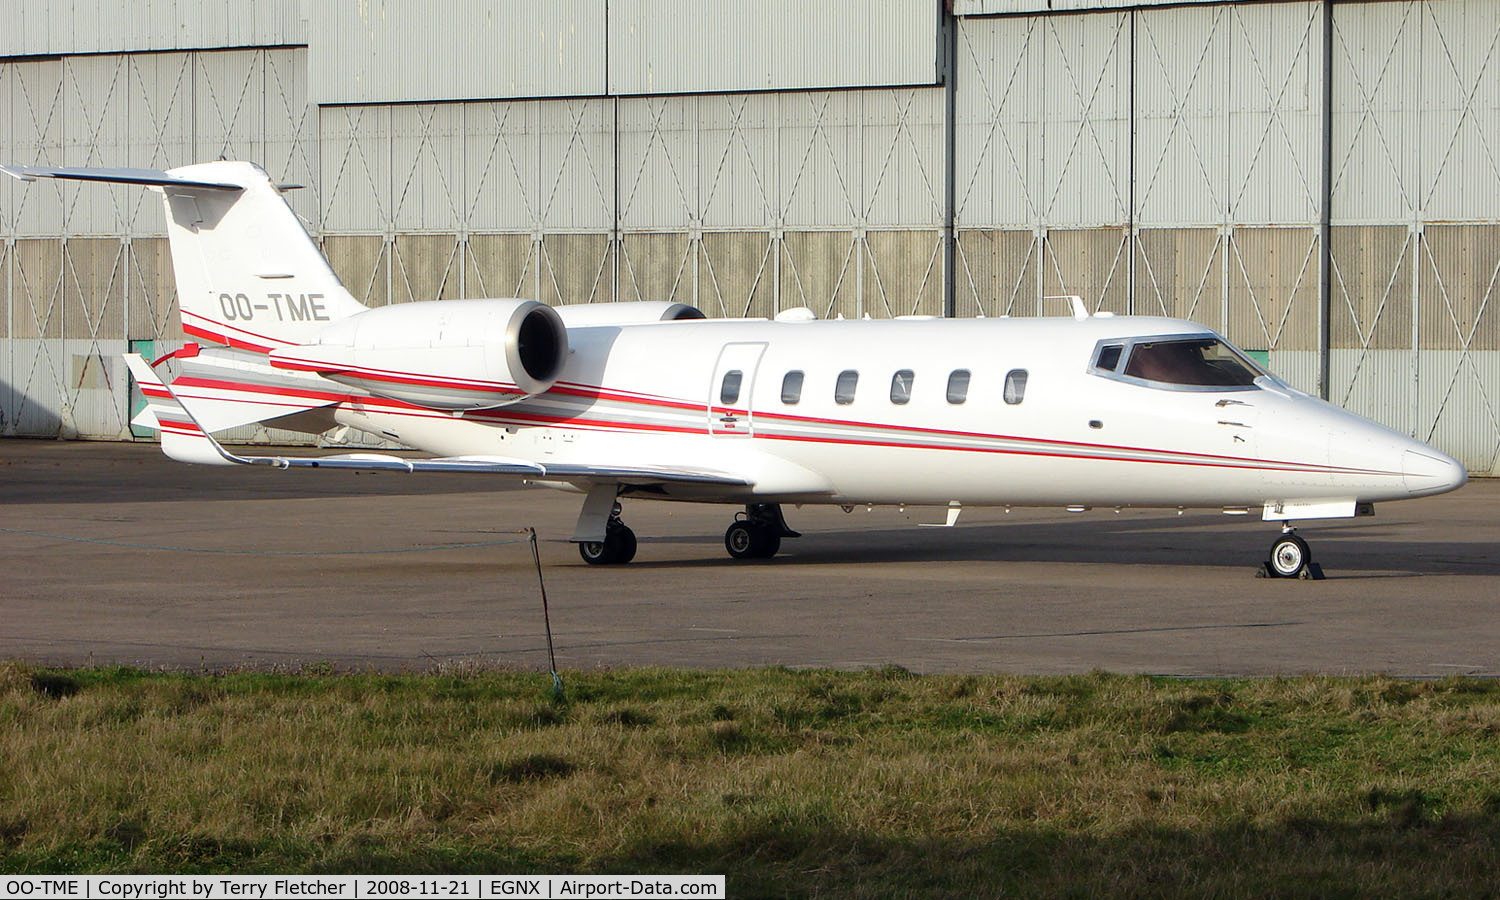 OO-TME, 2002 Learjet 60 C/N 60-255, Begian Learjet parked up at East Midlands